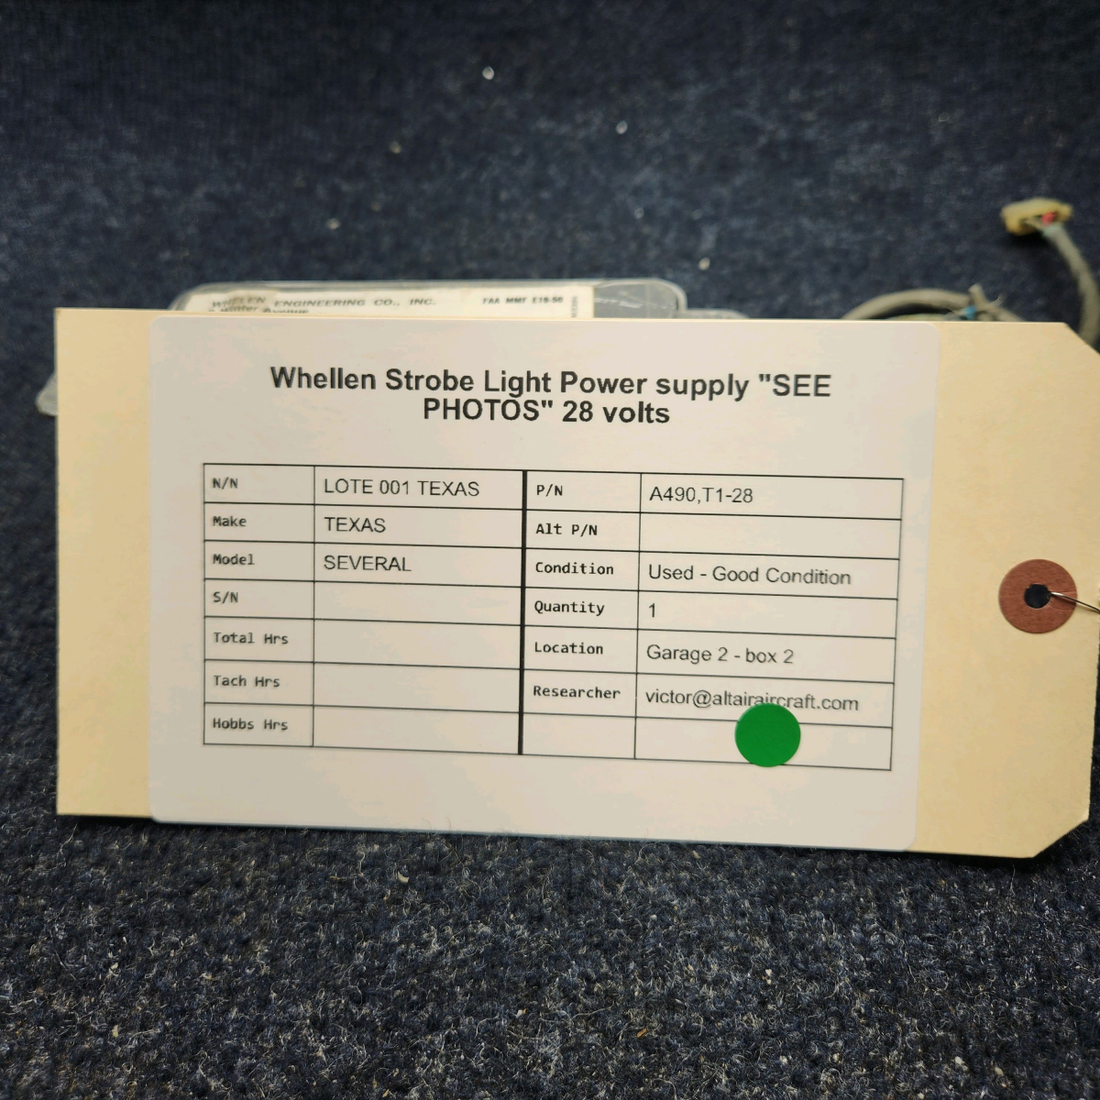 Used aircraft parts for sale, A490,T1-28 Whelen Strobe Power Supply WHELEN STROBE LIGHT POWER SUPPLY 28 VOLTS